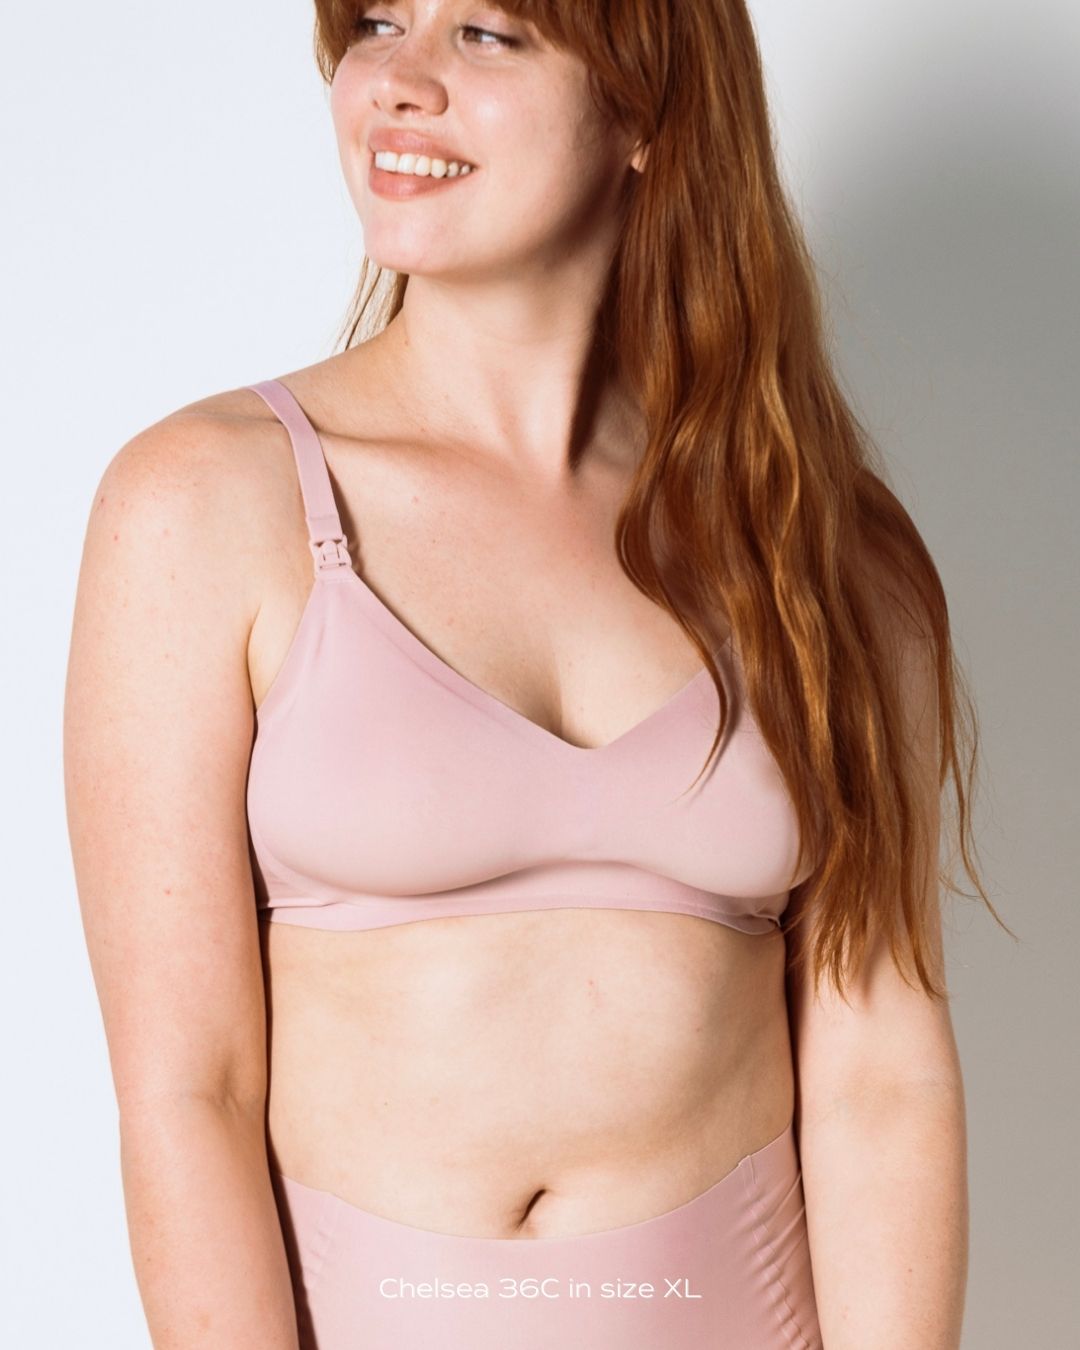 Rose & Thorne Lingerie - Mums of all stages are loving our Maternity  Collection! Great nursing bra! I am in love with this bra! I always get  nervous purchasing bras online as